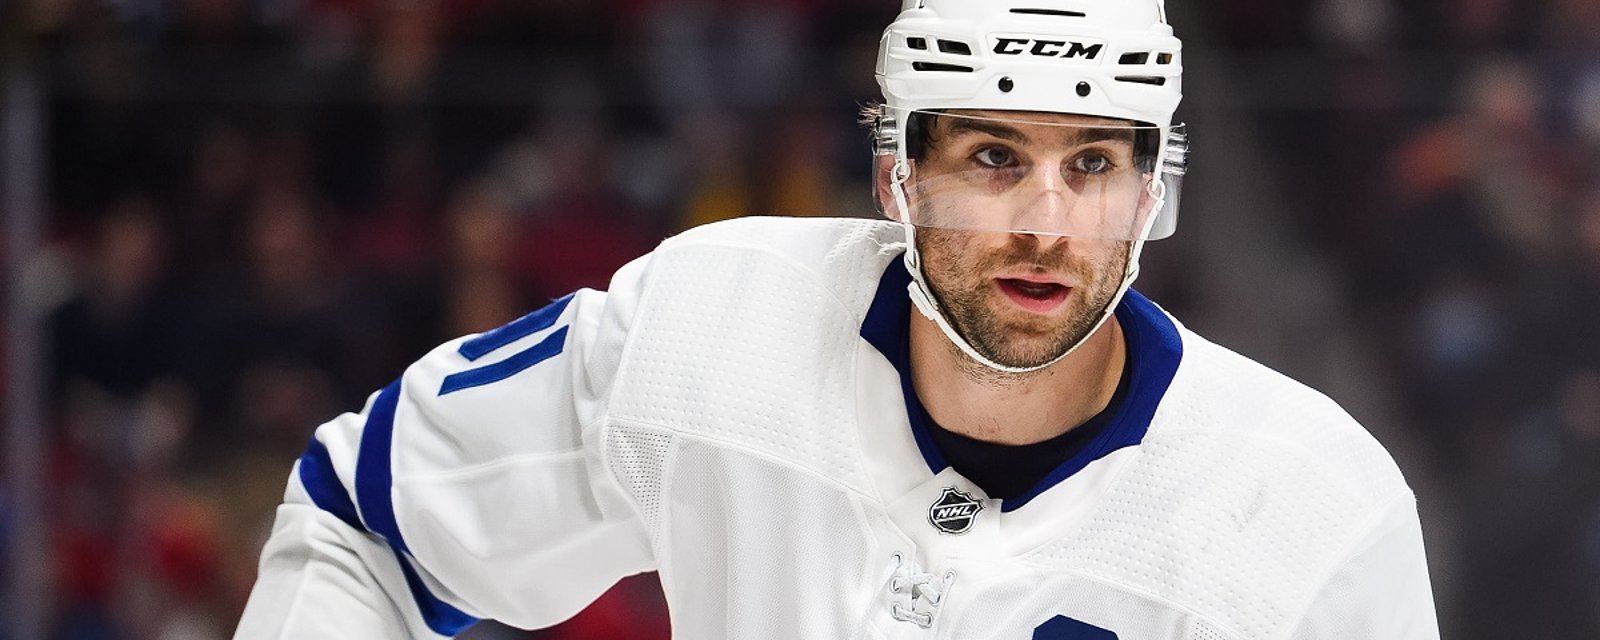 Bruins reporter suggests outrageous trade involving John Tavares.